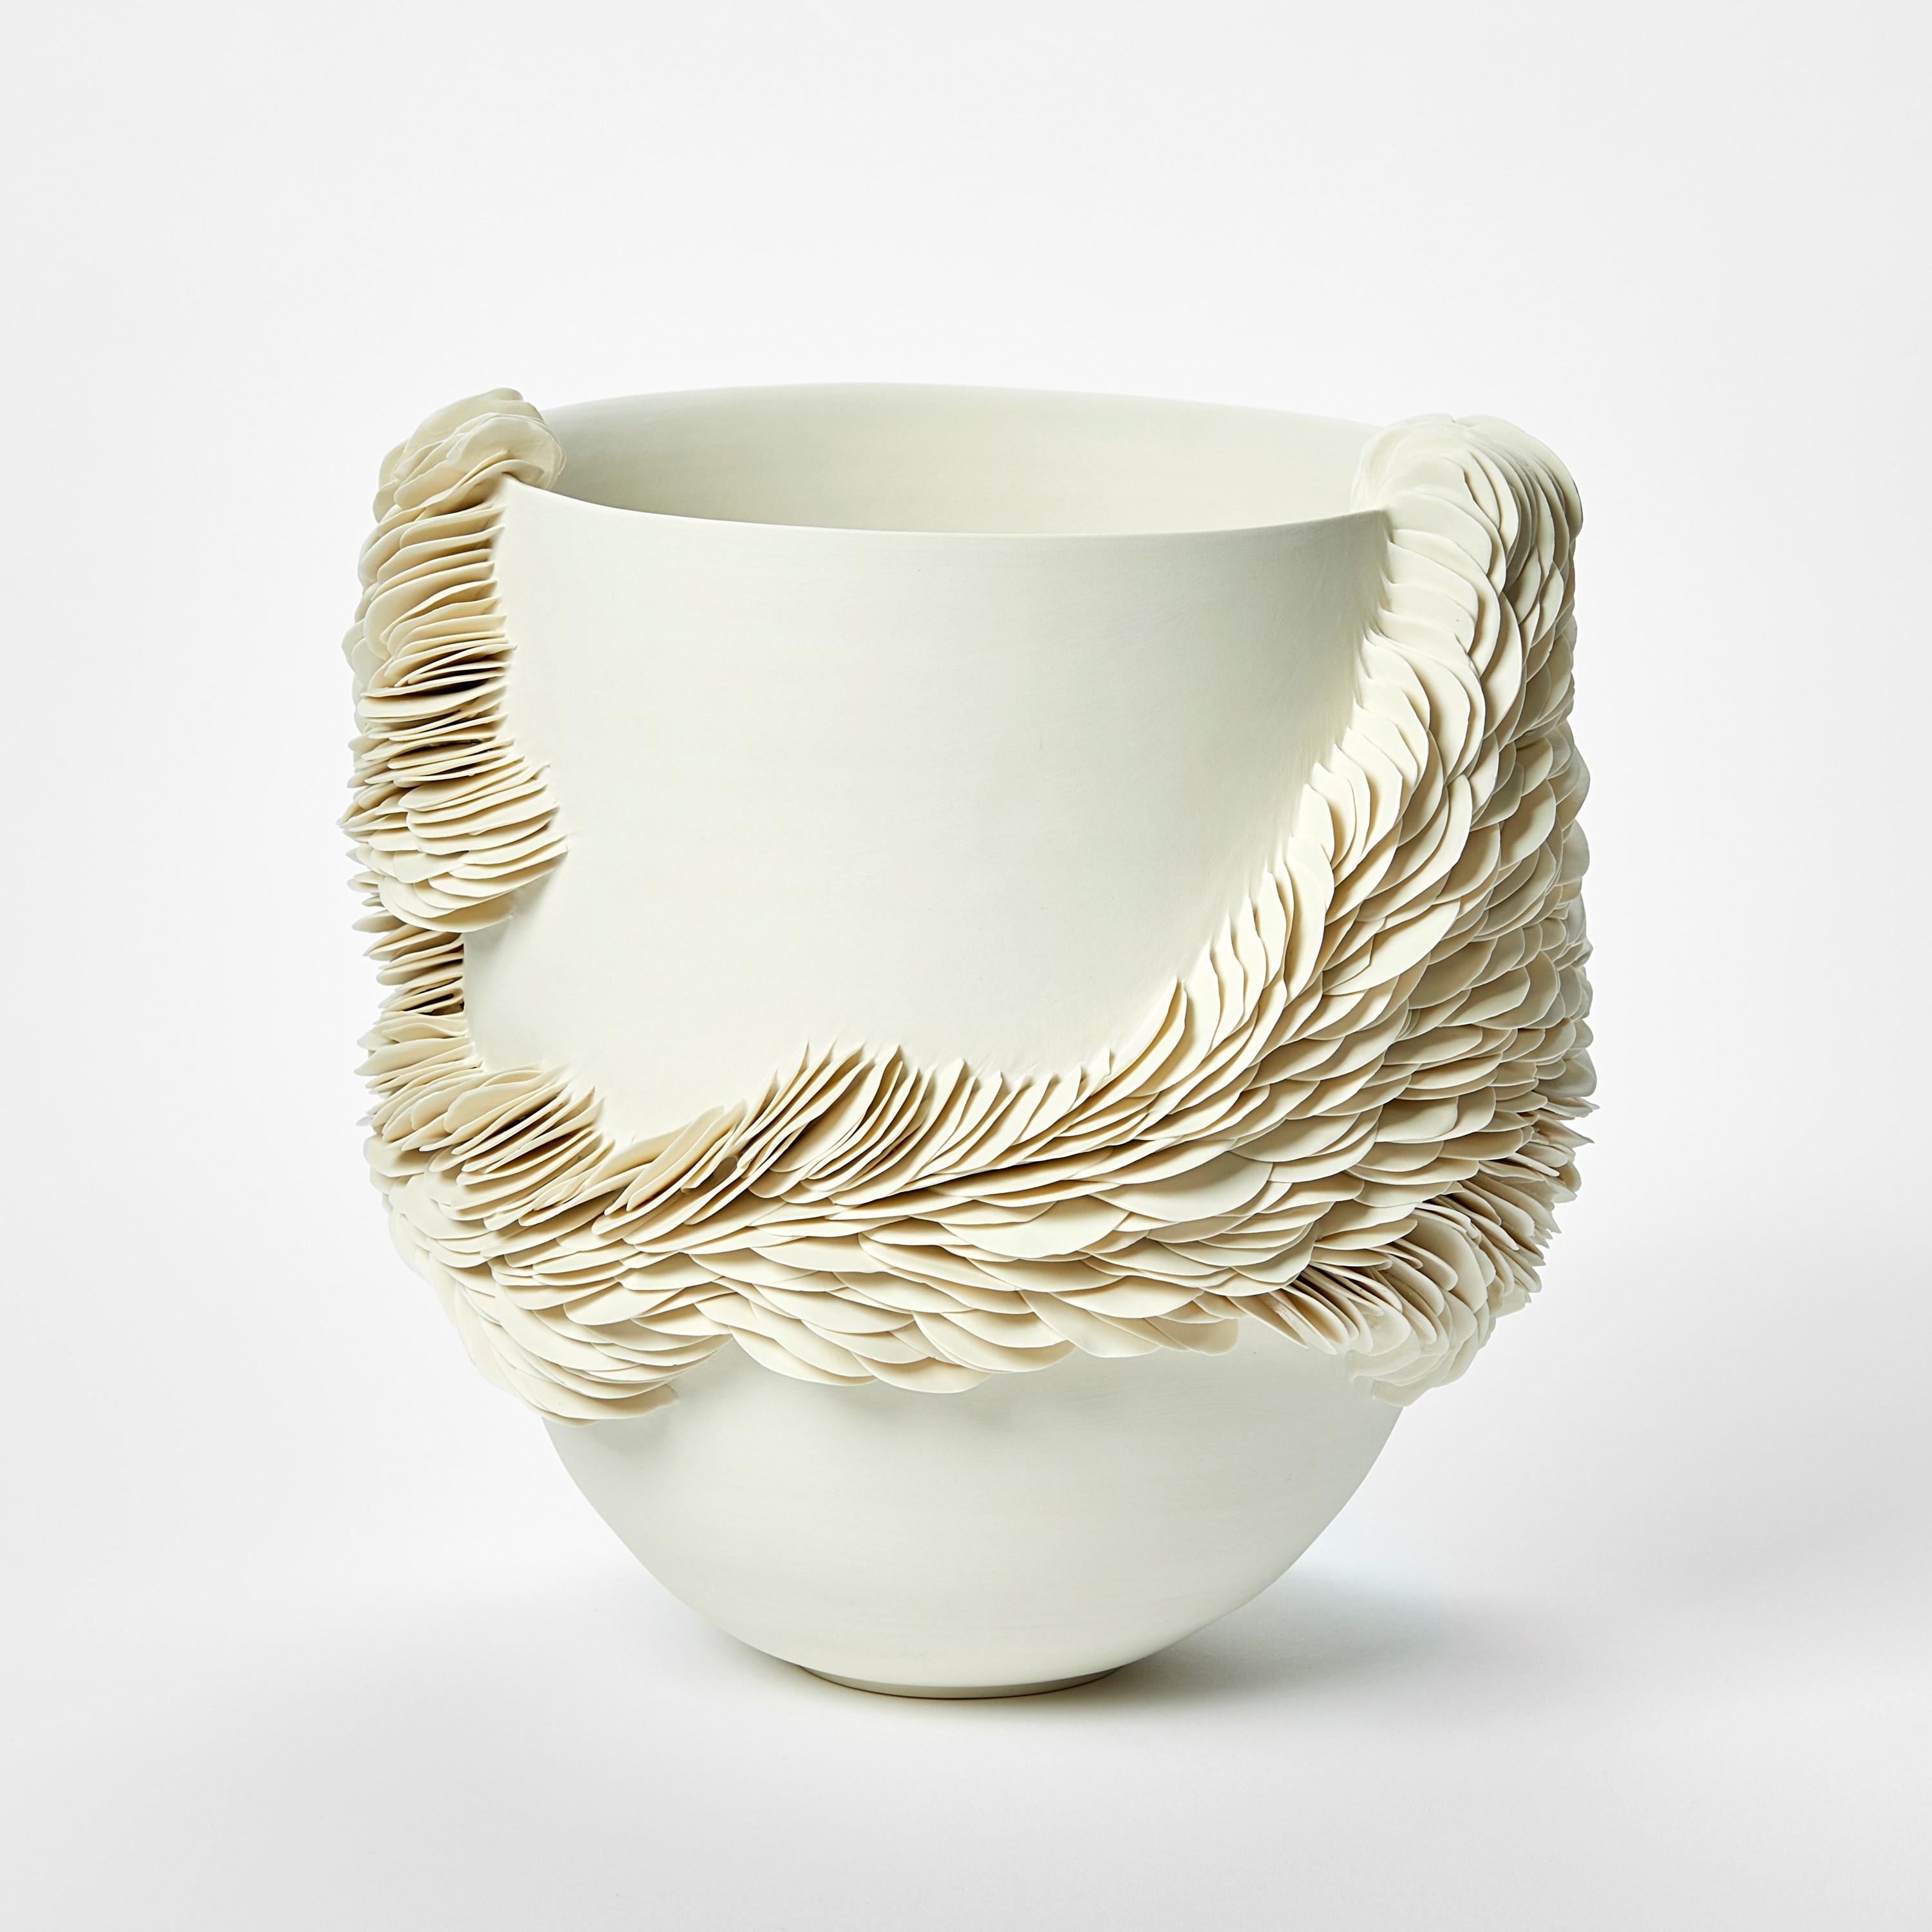 British White Tall Wrapping Bowl I, a porcelain shard textured bowl by Olivia Walker